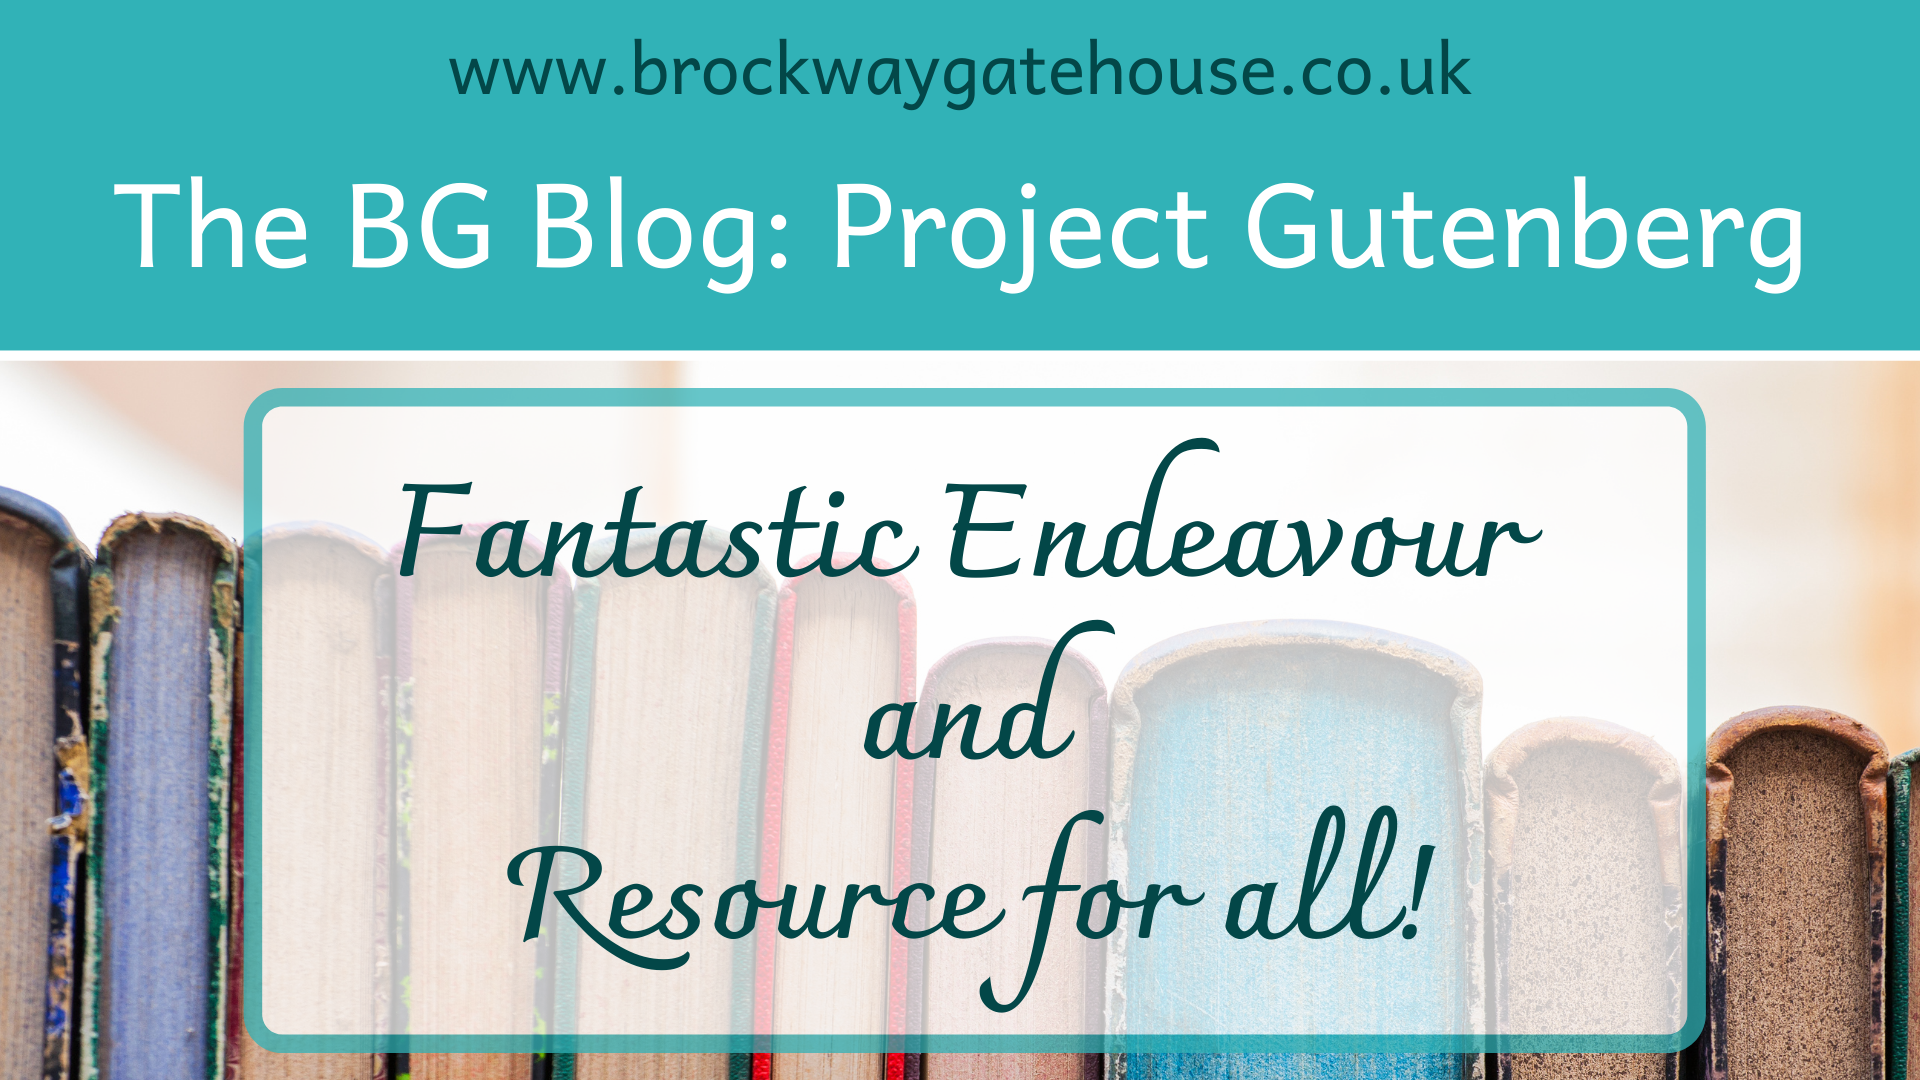 Project Gutenberg: Fantastic Endeavour and Resource for all!